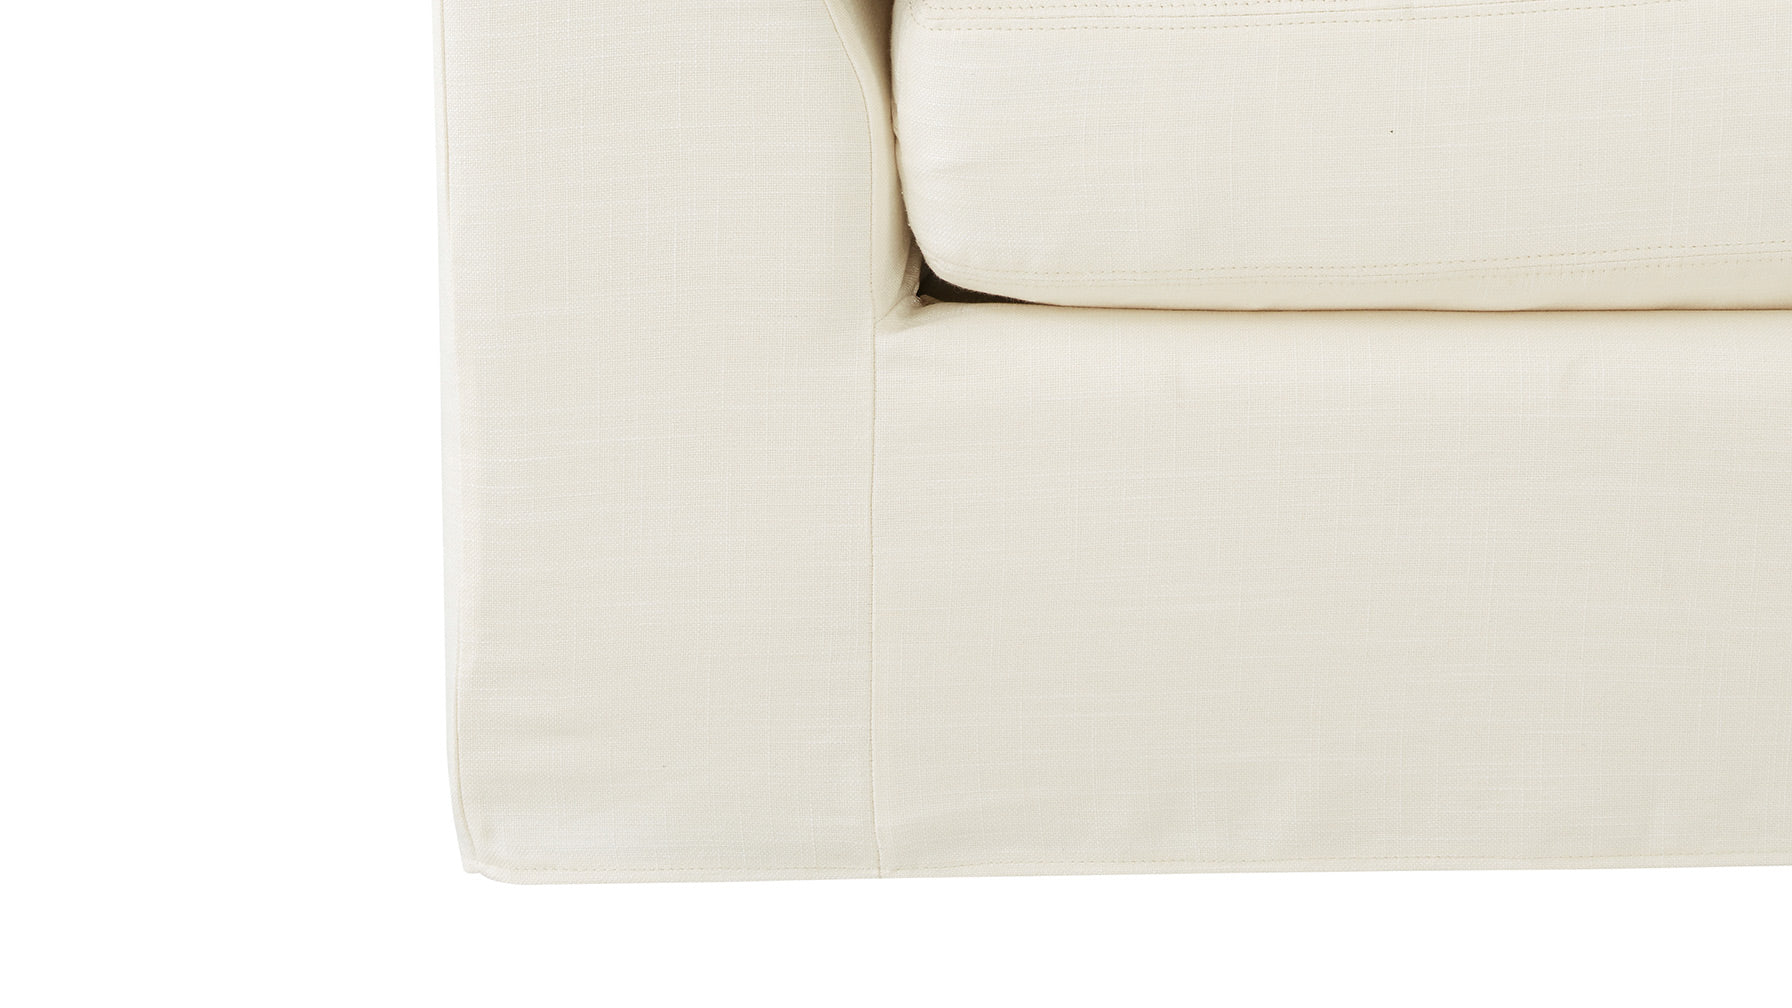 Get Together™ Armless Chair, Large, Cream Linen - Image 10